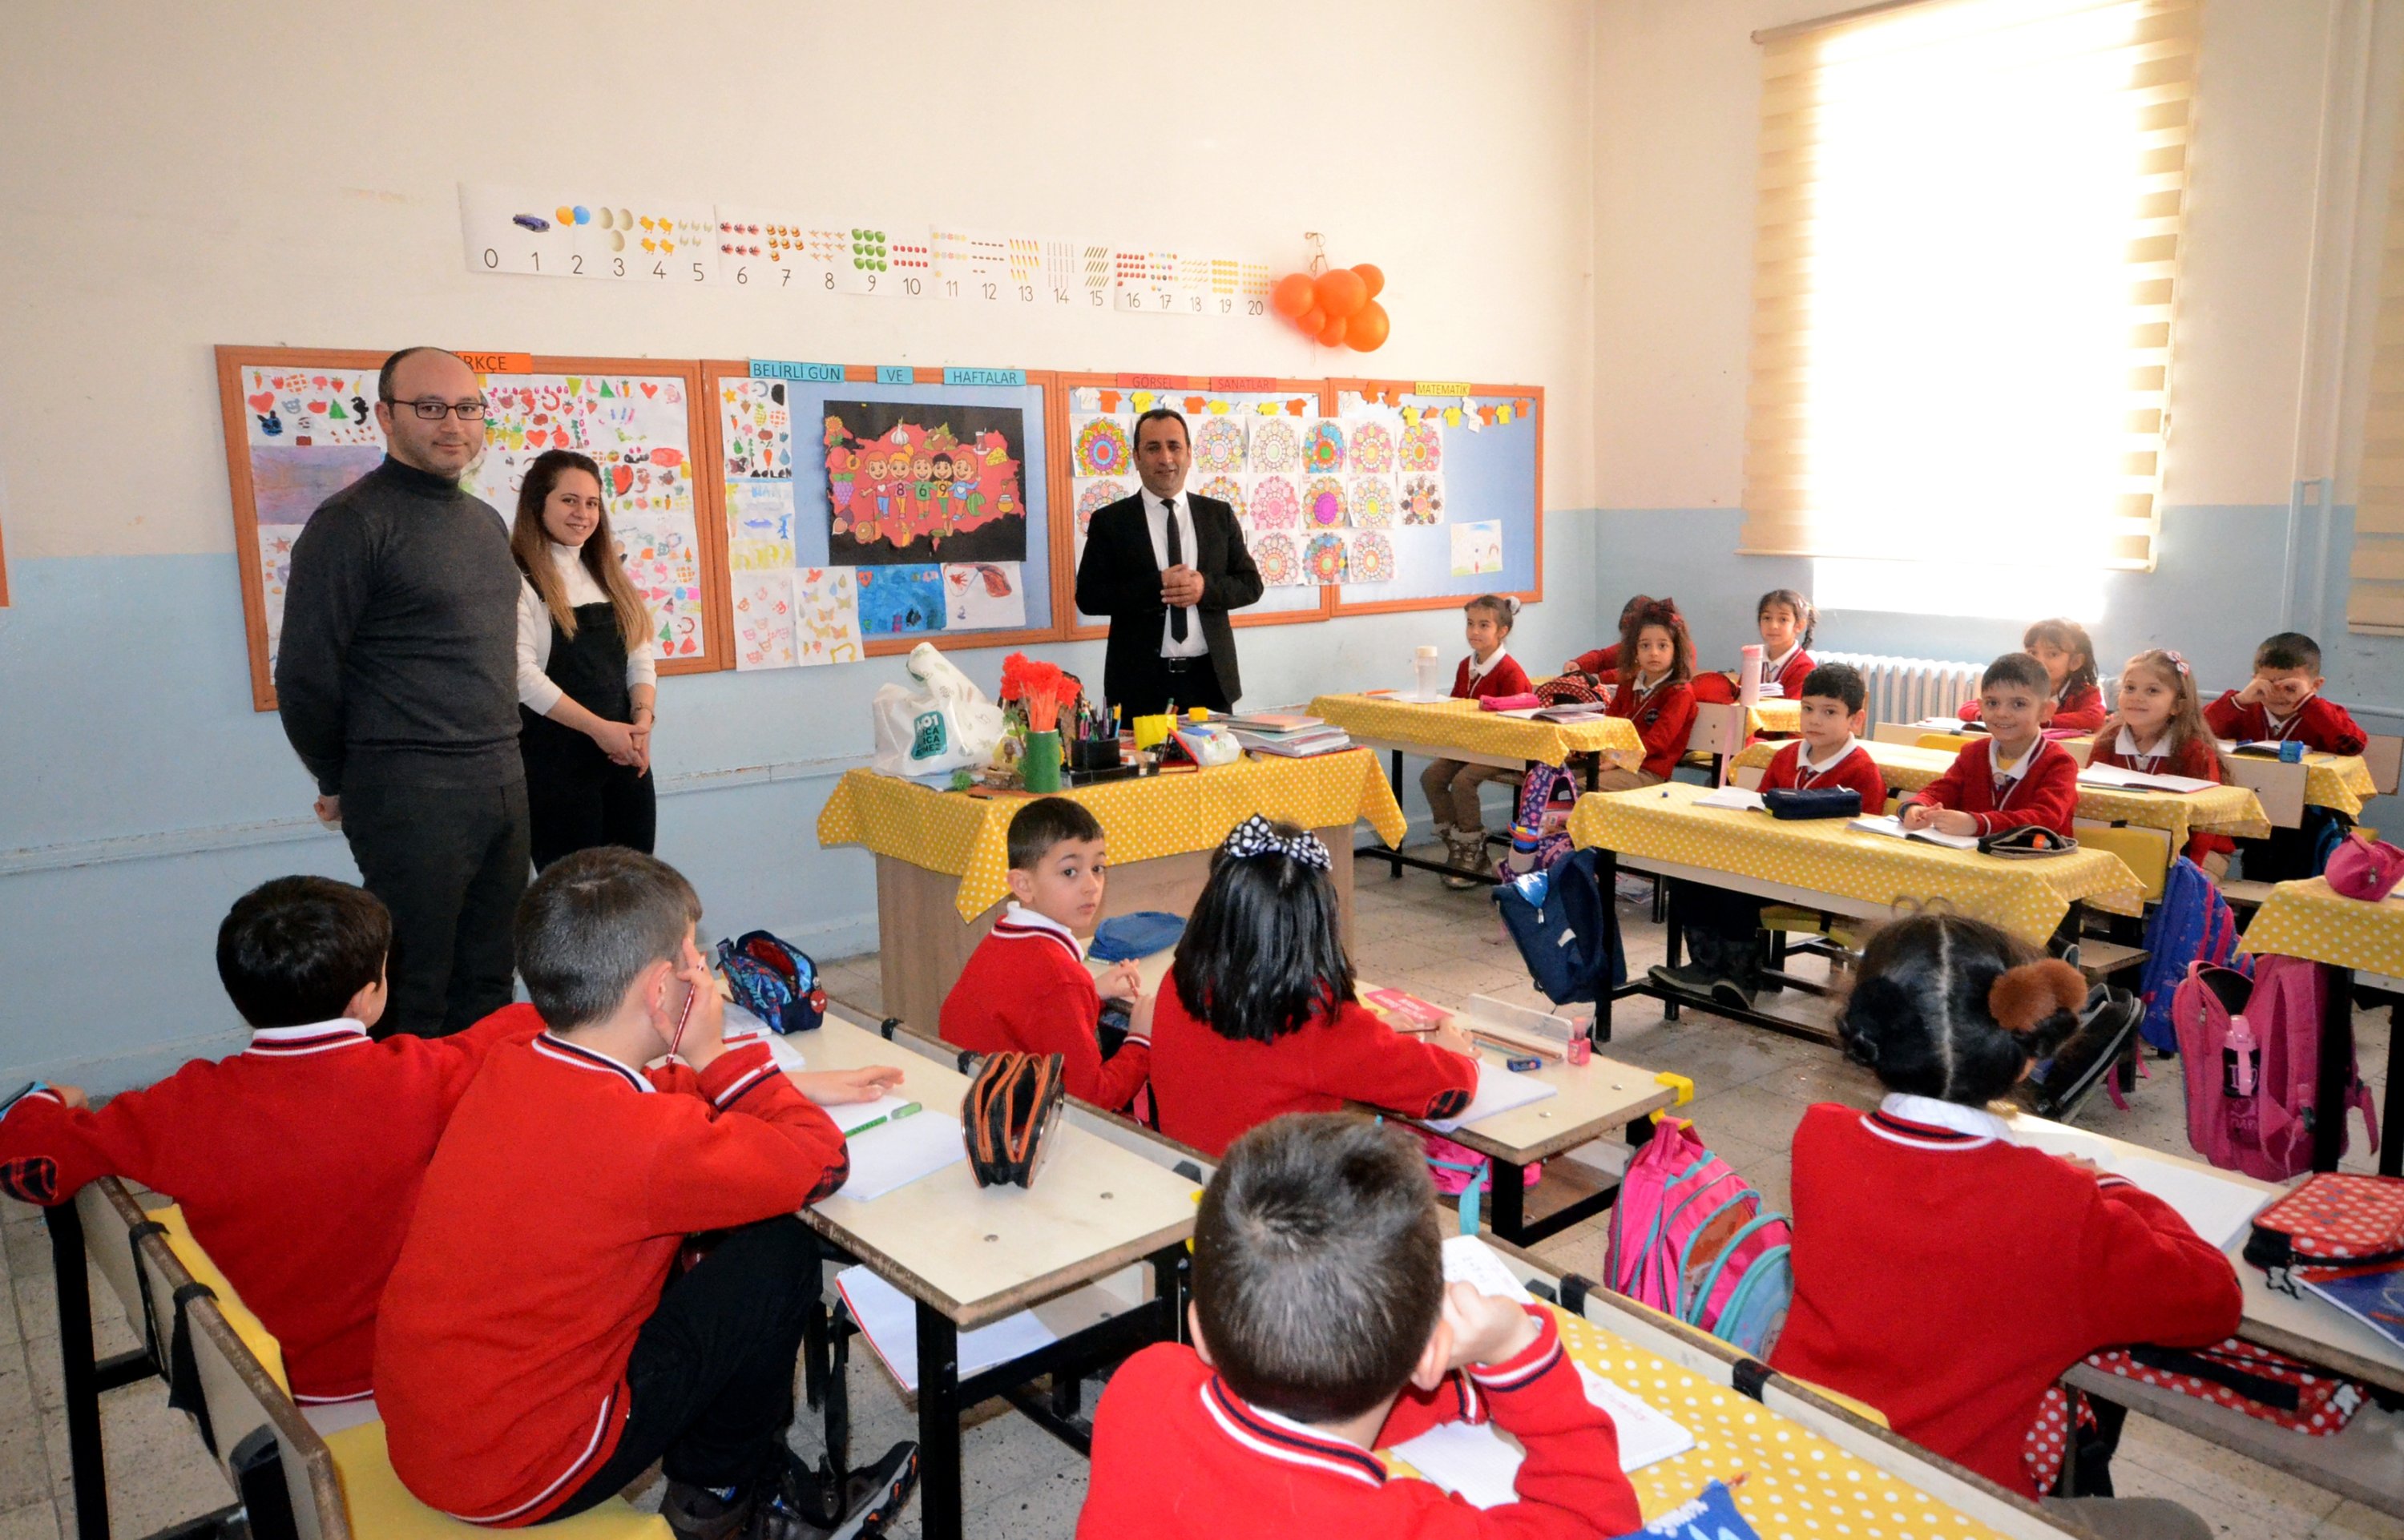 Türkiye's hospital classrooms maintain young patients' education ...